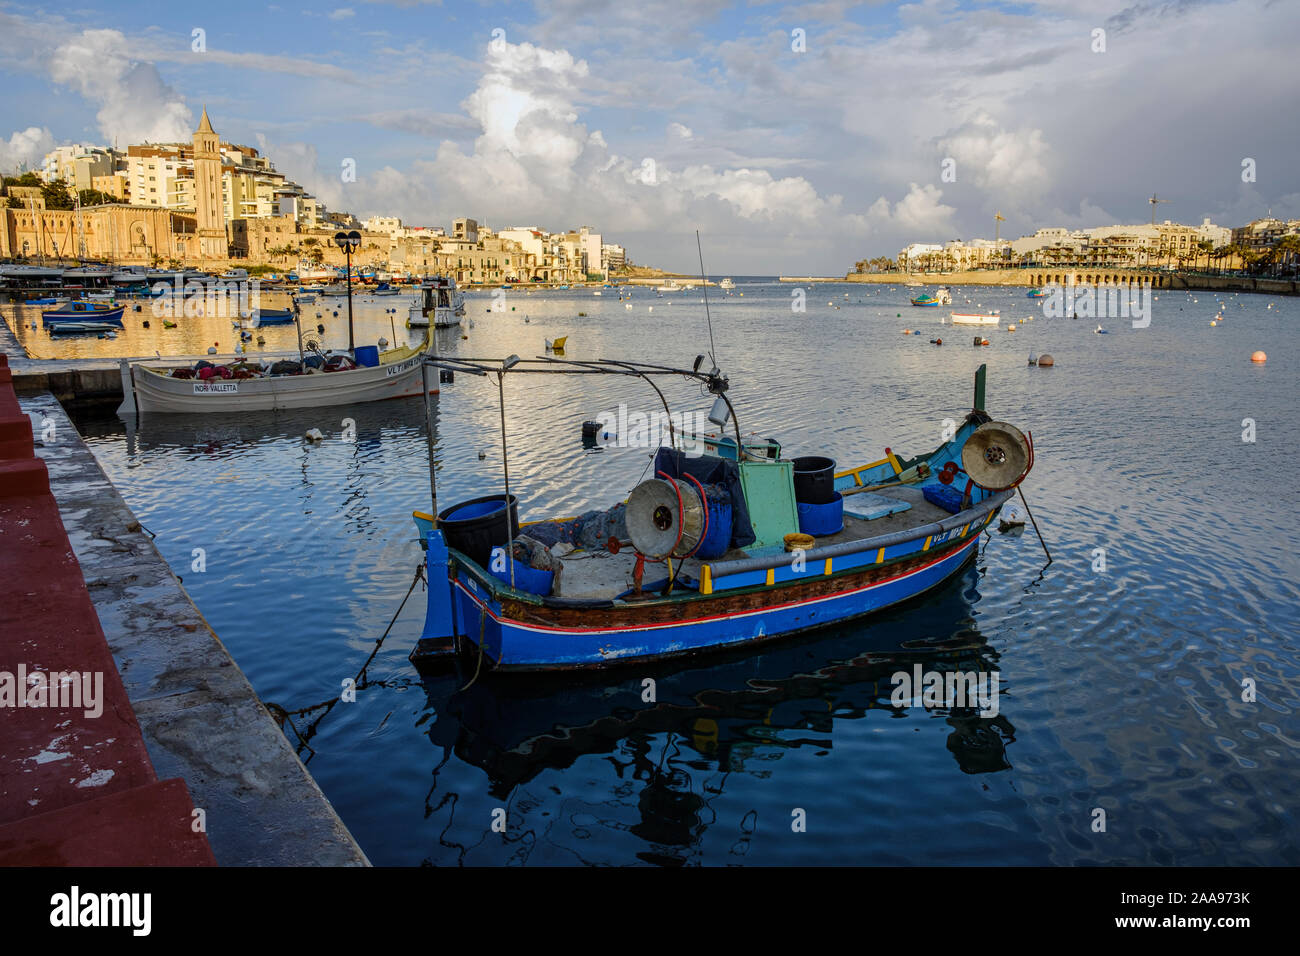 A luzzu, one of the traditional brightly coloured Maltese fishing boats in the harbour at Marsaskala, Malta Stock Photo